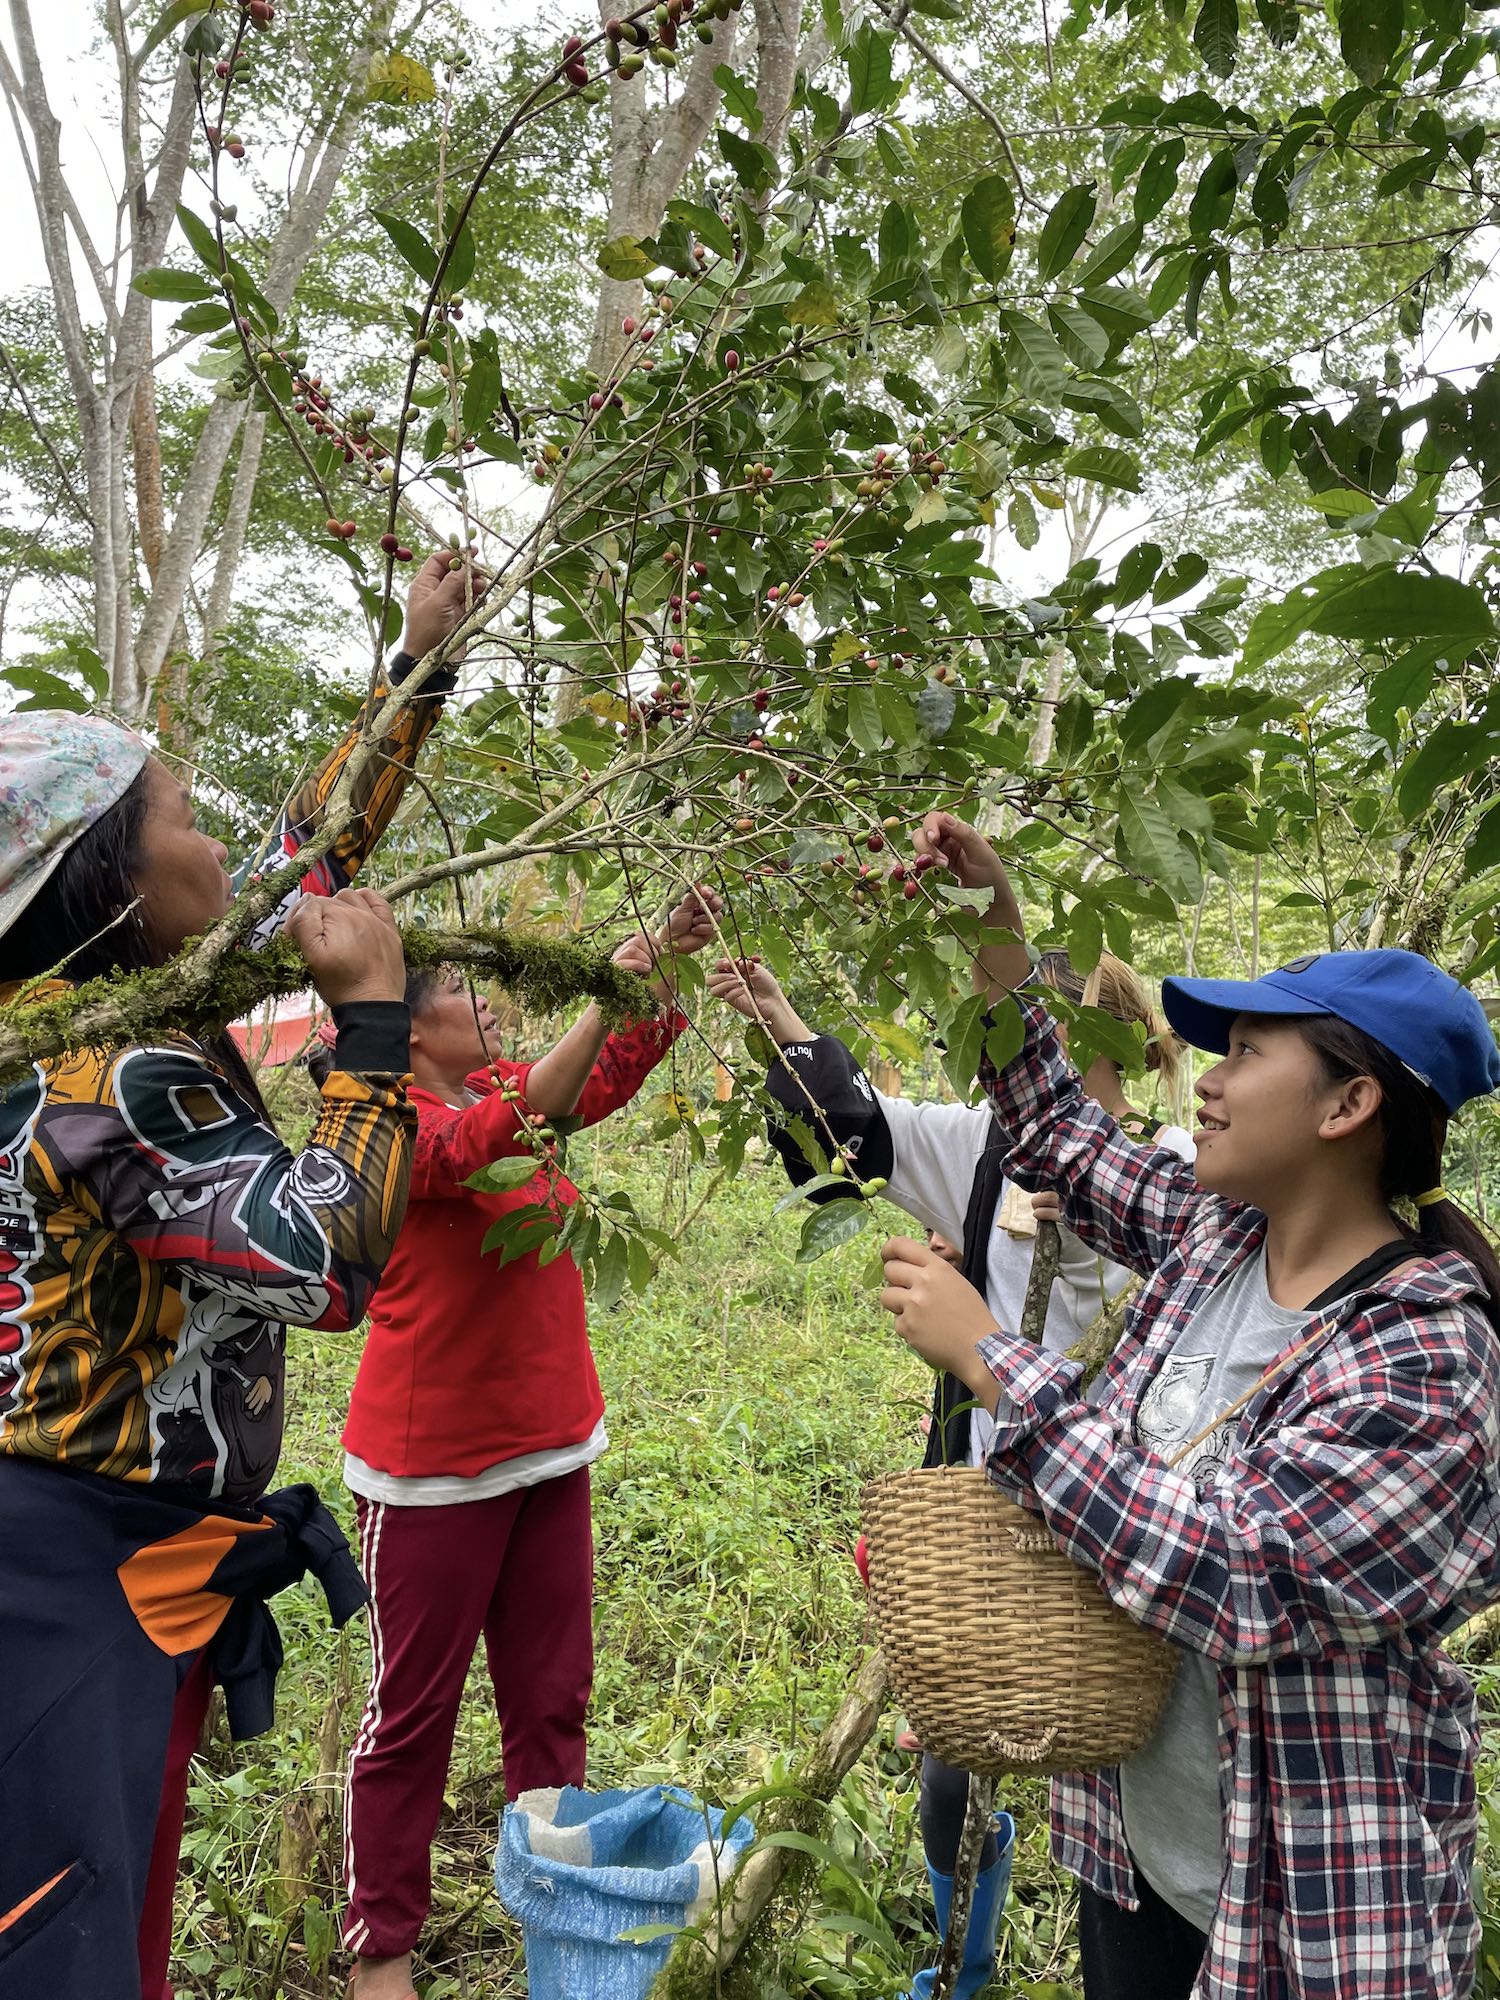 Farmers of Sitio San Roque picking ripe coffee cherries from the tree